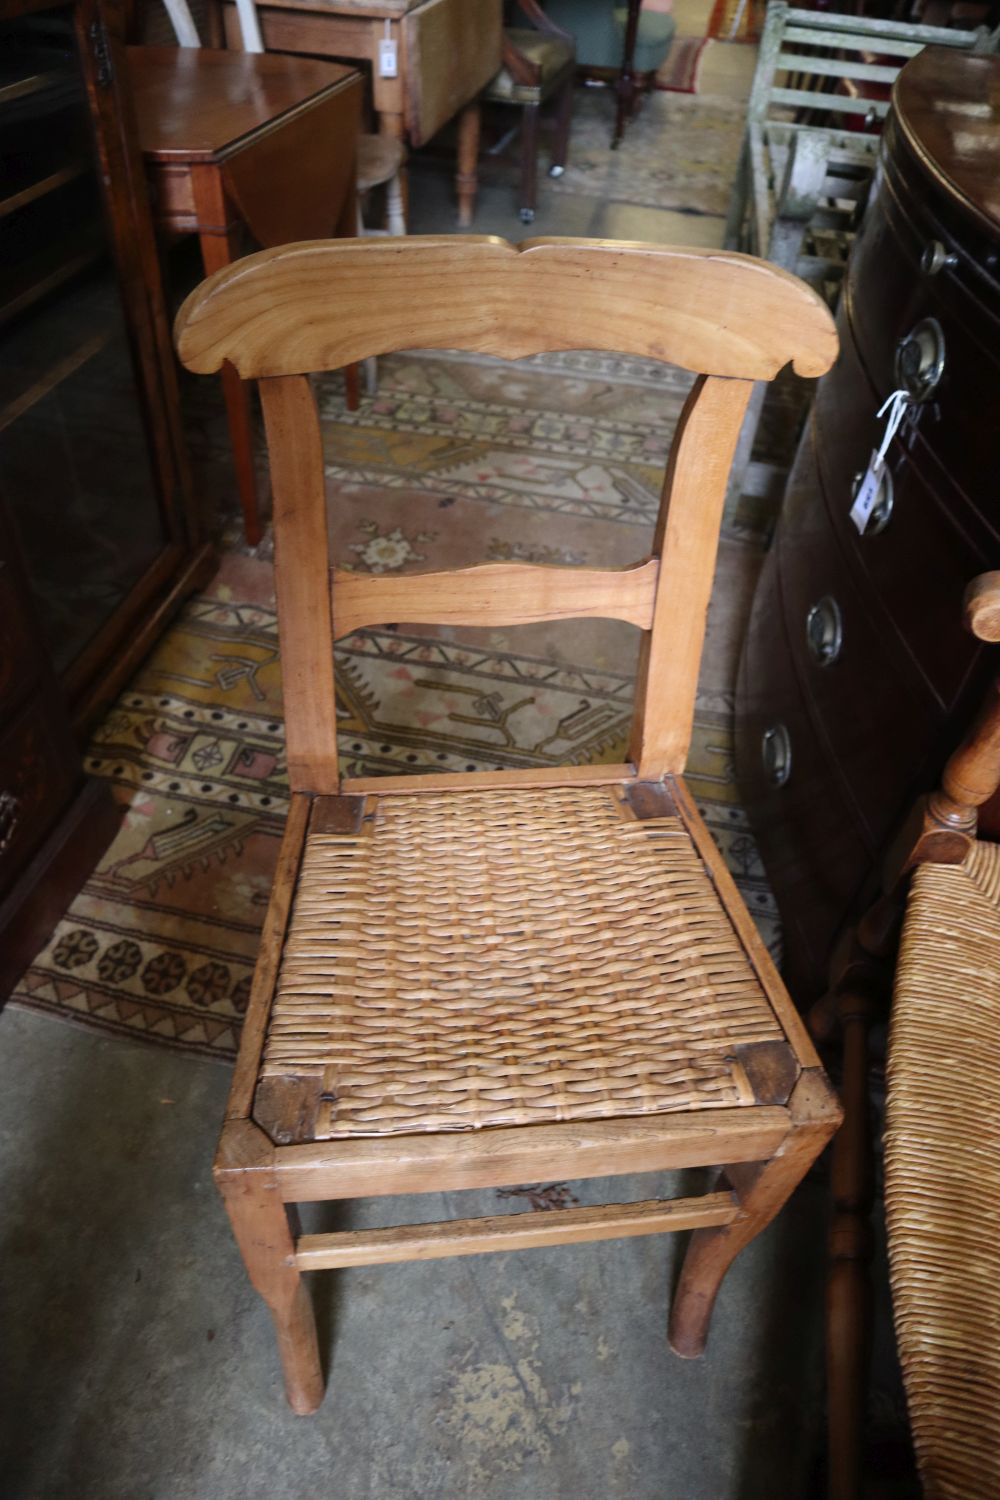 A pair of beech rush seat elbow chairs and a pair of 19th century French fruitwood chairs